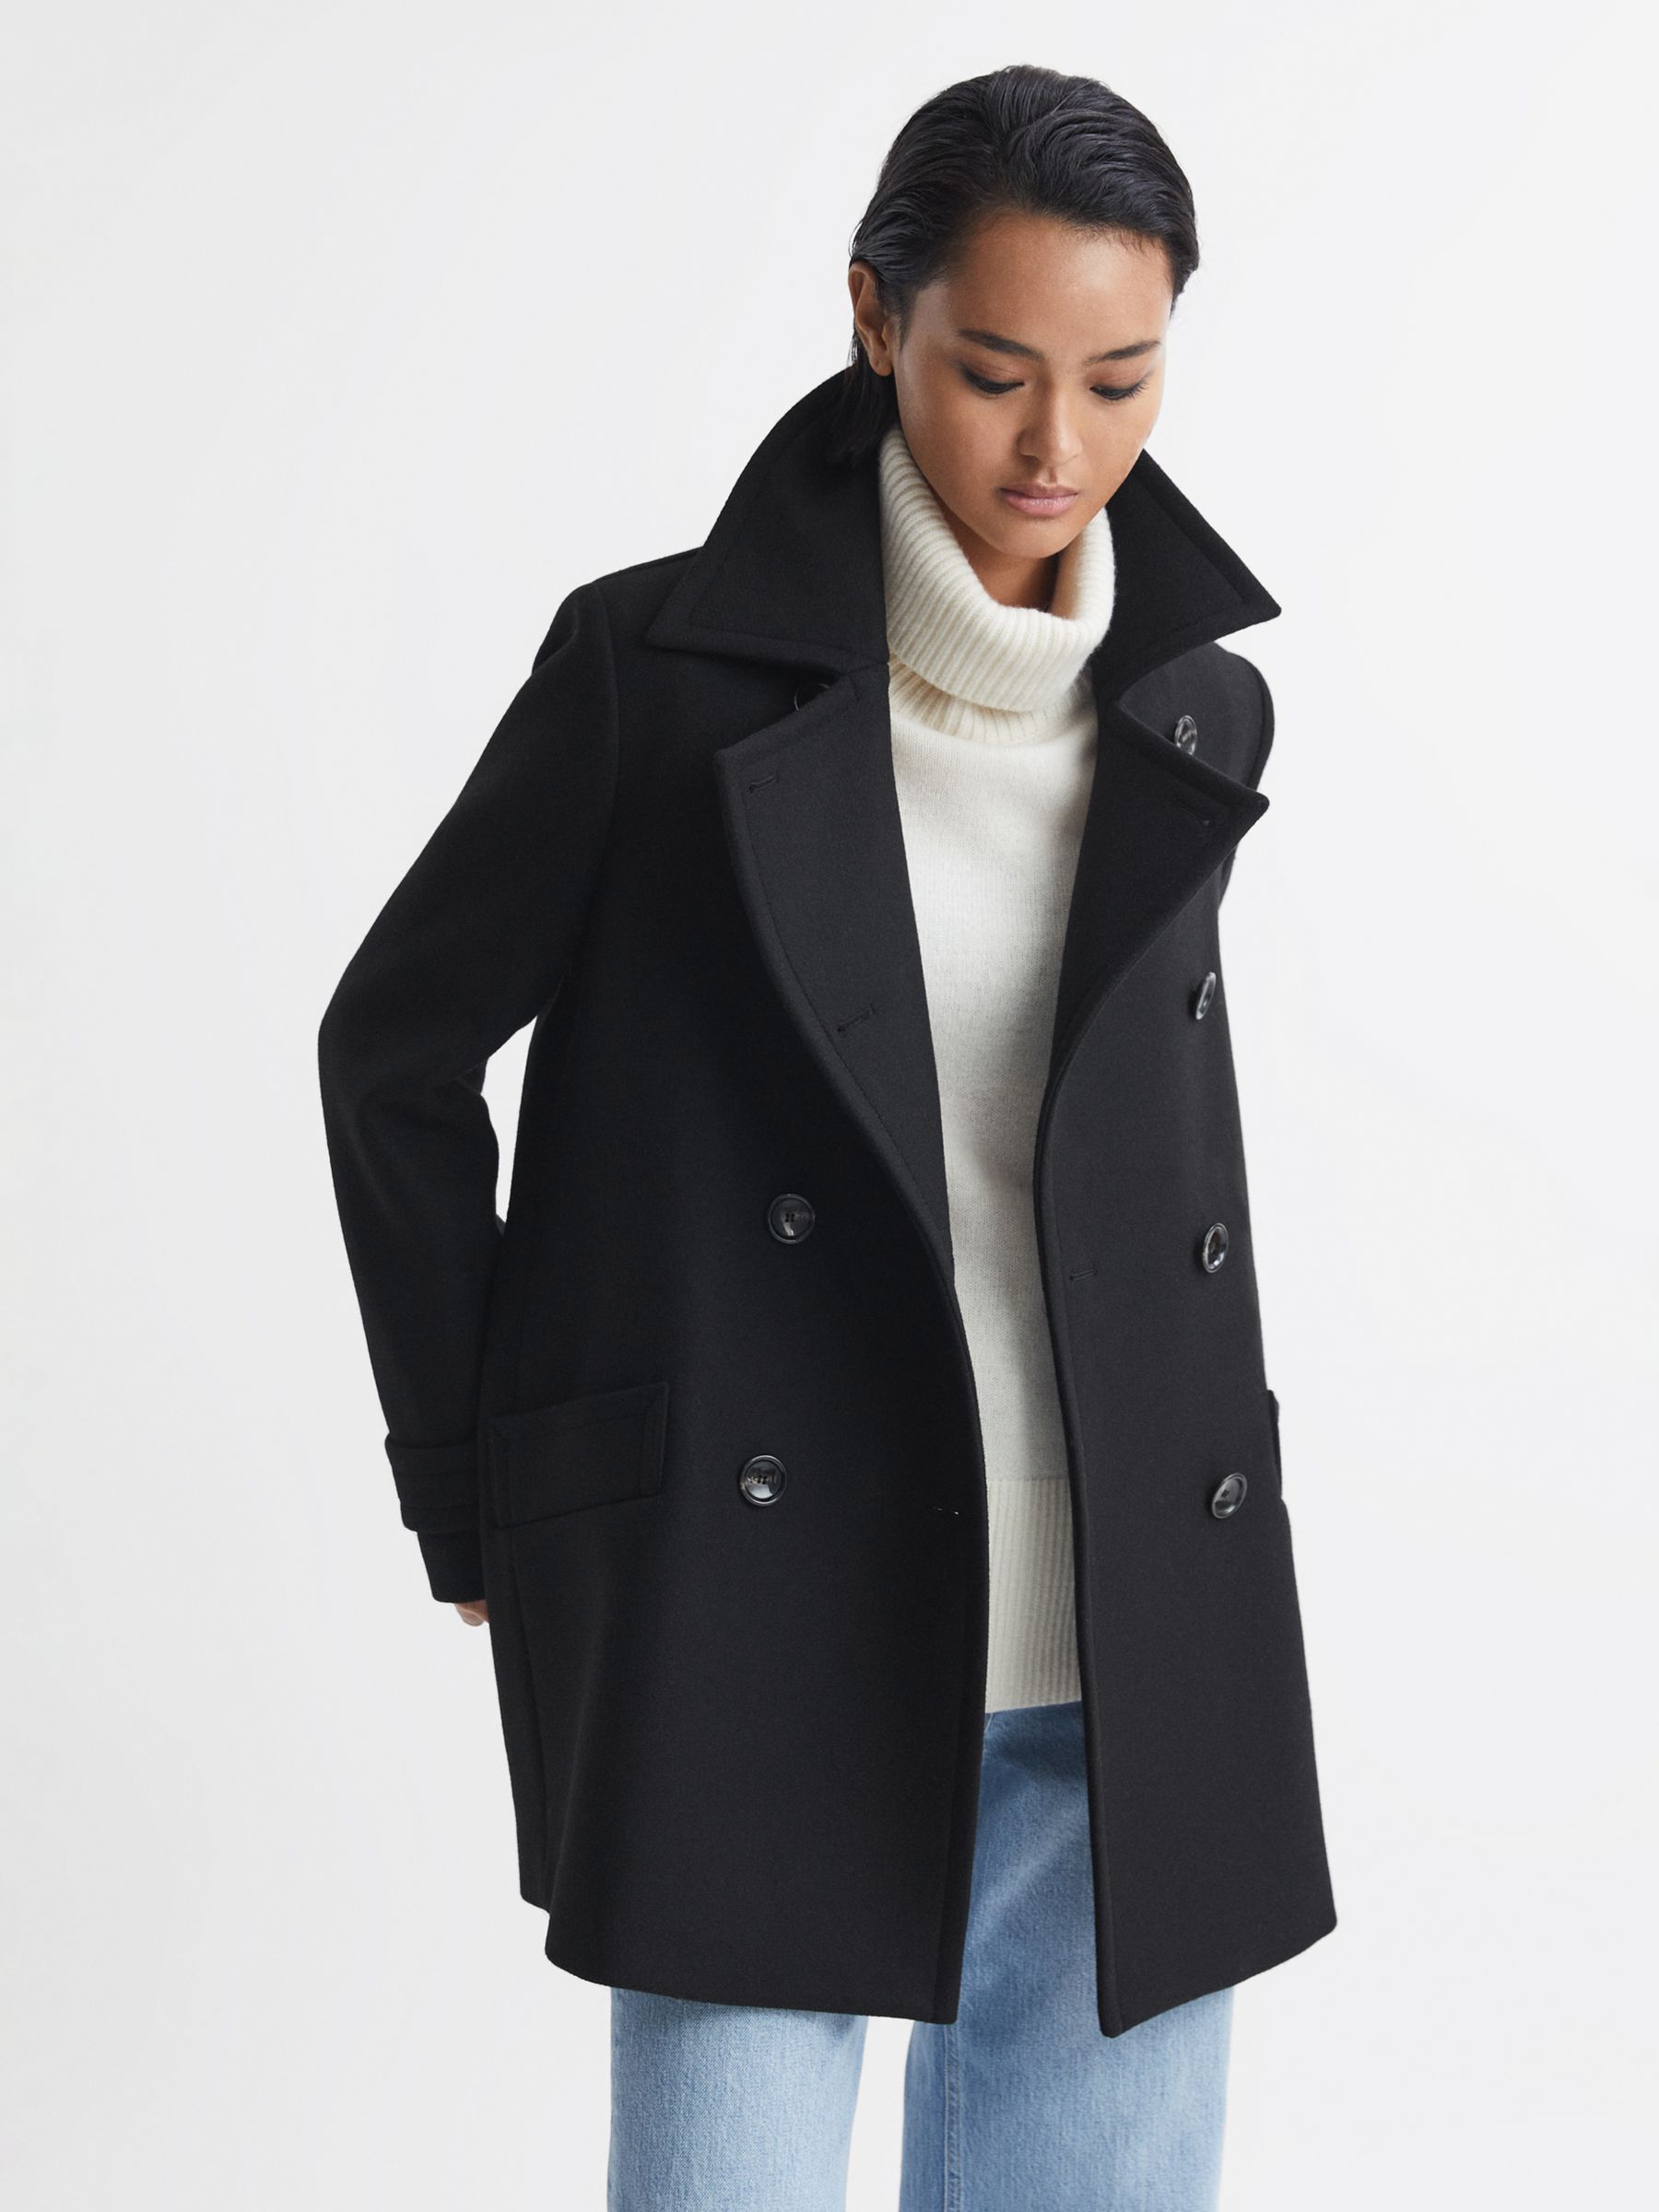 Reiss Maisie Short Double Breasted Peacoat, Black